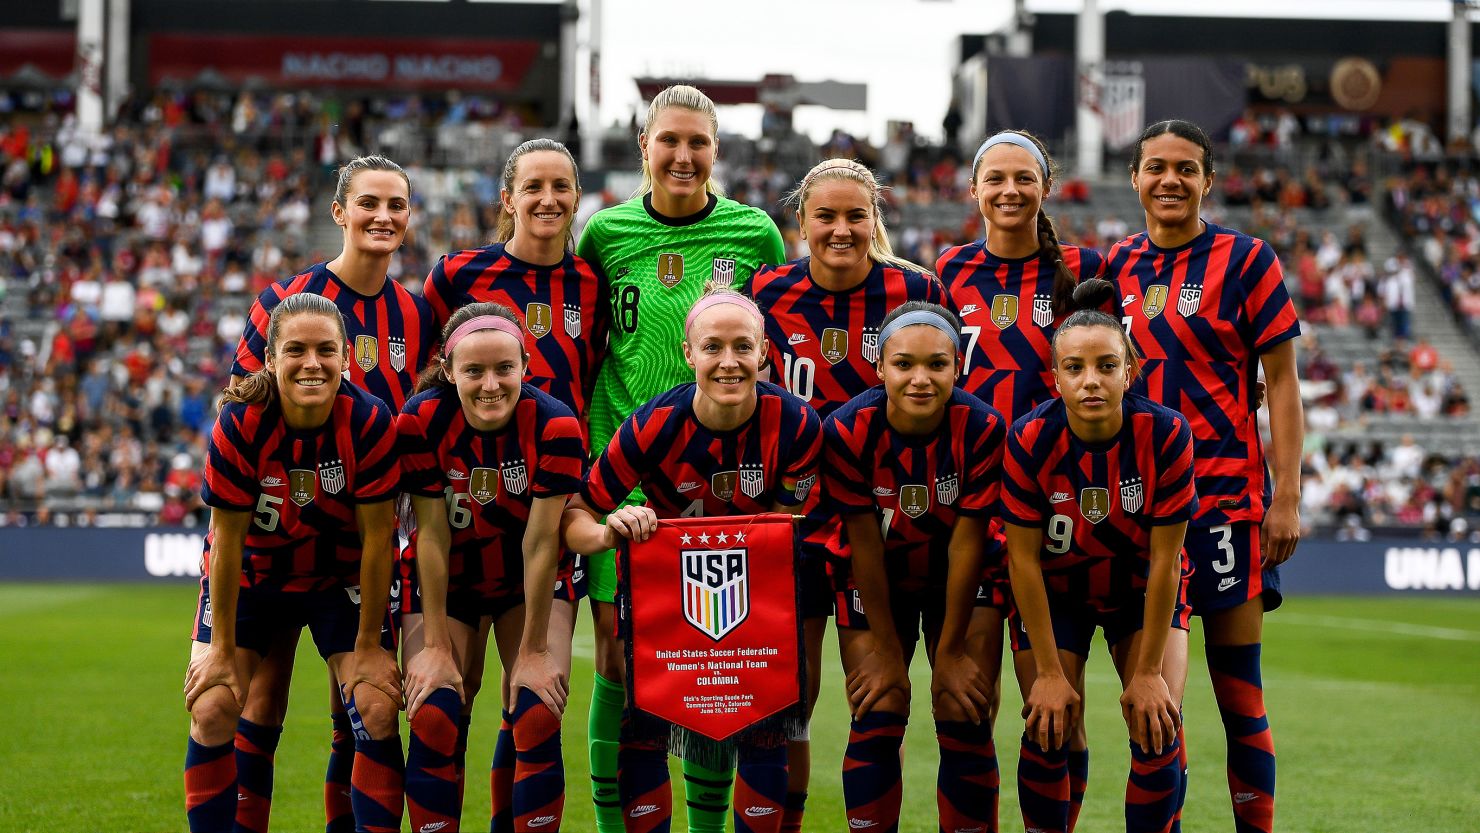 United States Women's National Team earns more money from men's World Cup  than its previous two women's tournaments